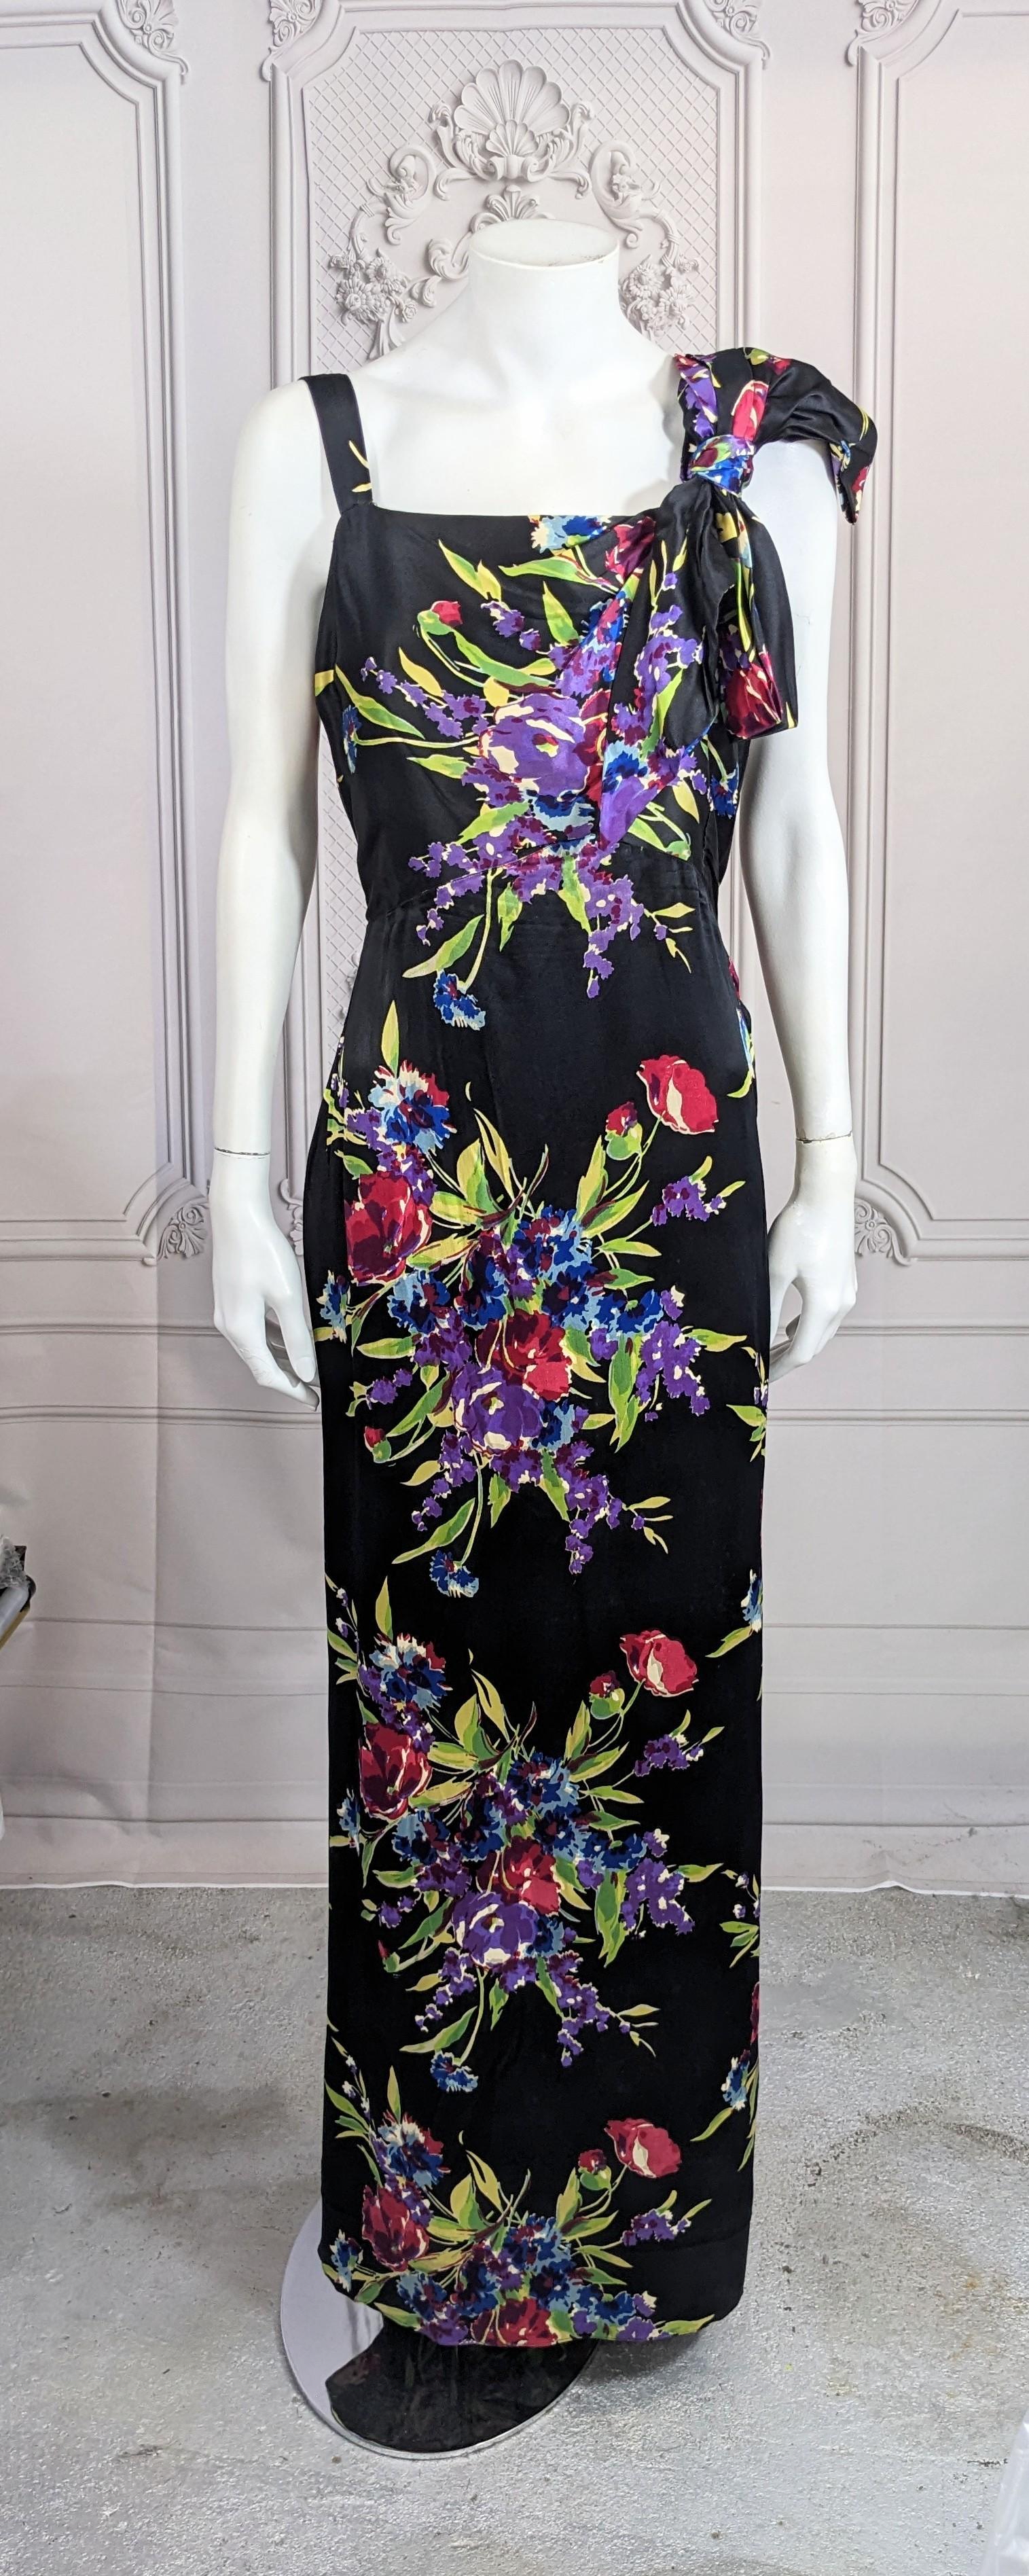 1930's Silk Satin Floral Gown made of Paul Poiret Designed Textile. Elegant design with draped bodice caught up into a large bow on left shouder. Simple straight cut with a circular panel on back skirt forming a small train. Side snap closures and 2